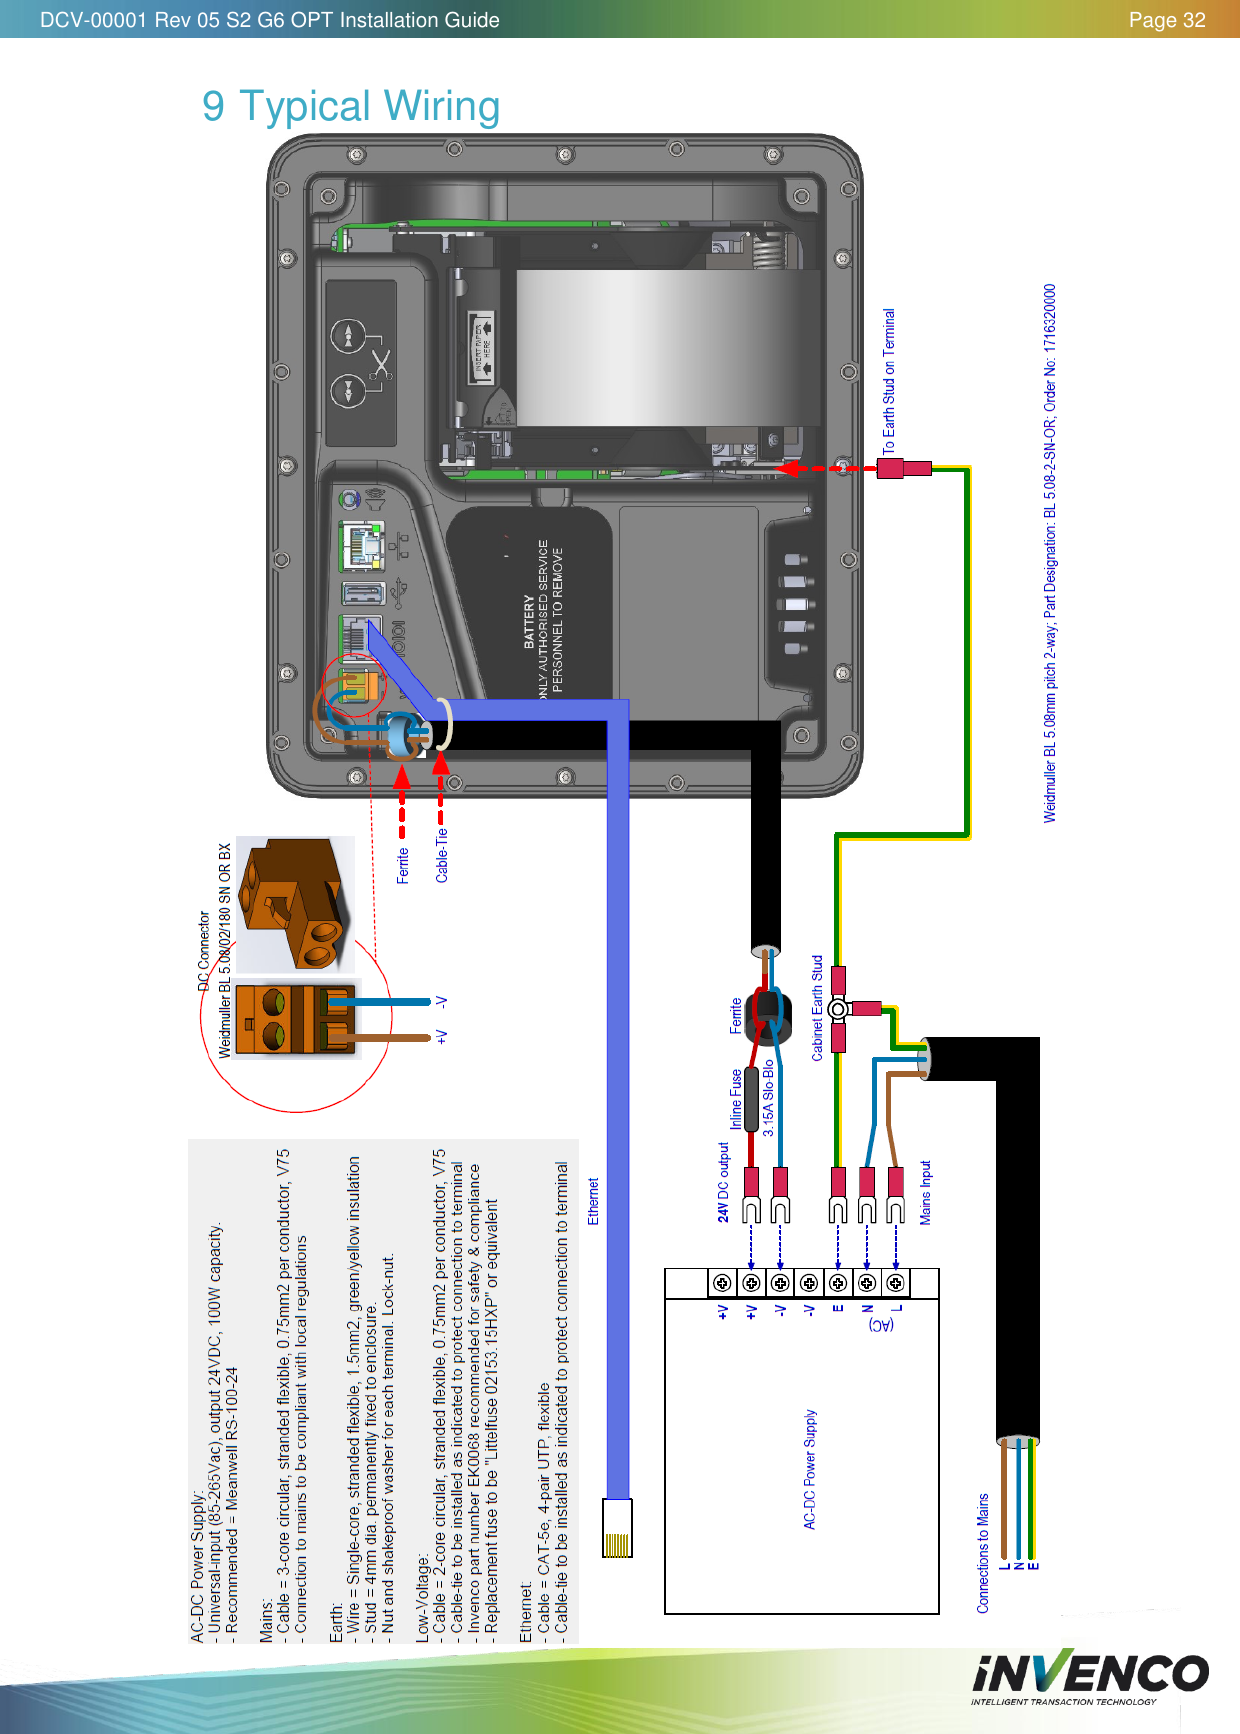   DCV-00001 Rev 05 S2 G6 OPT Installation Guide    Page 32  9 Typical Wiring     